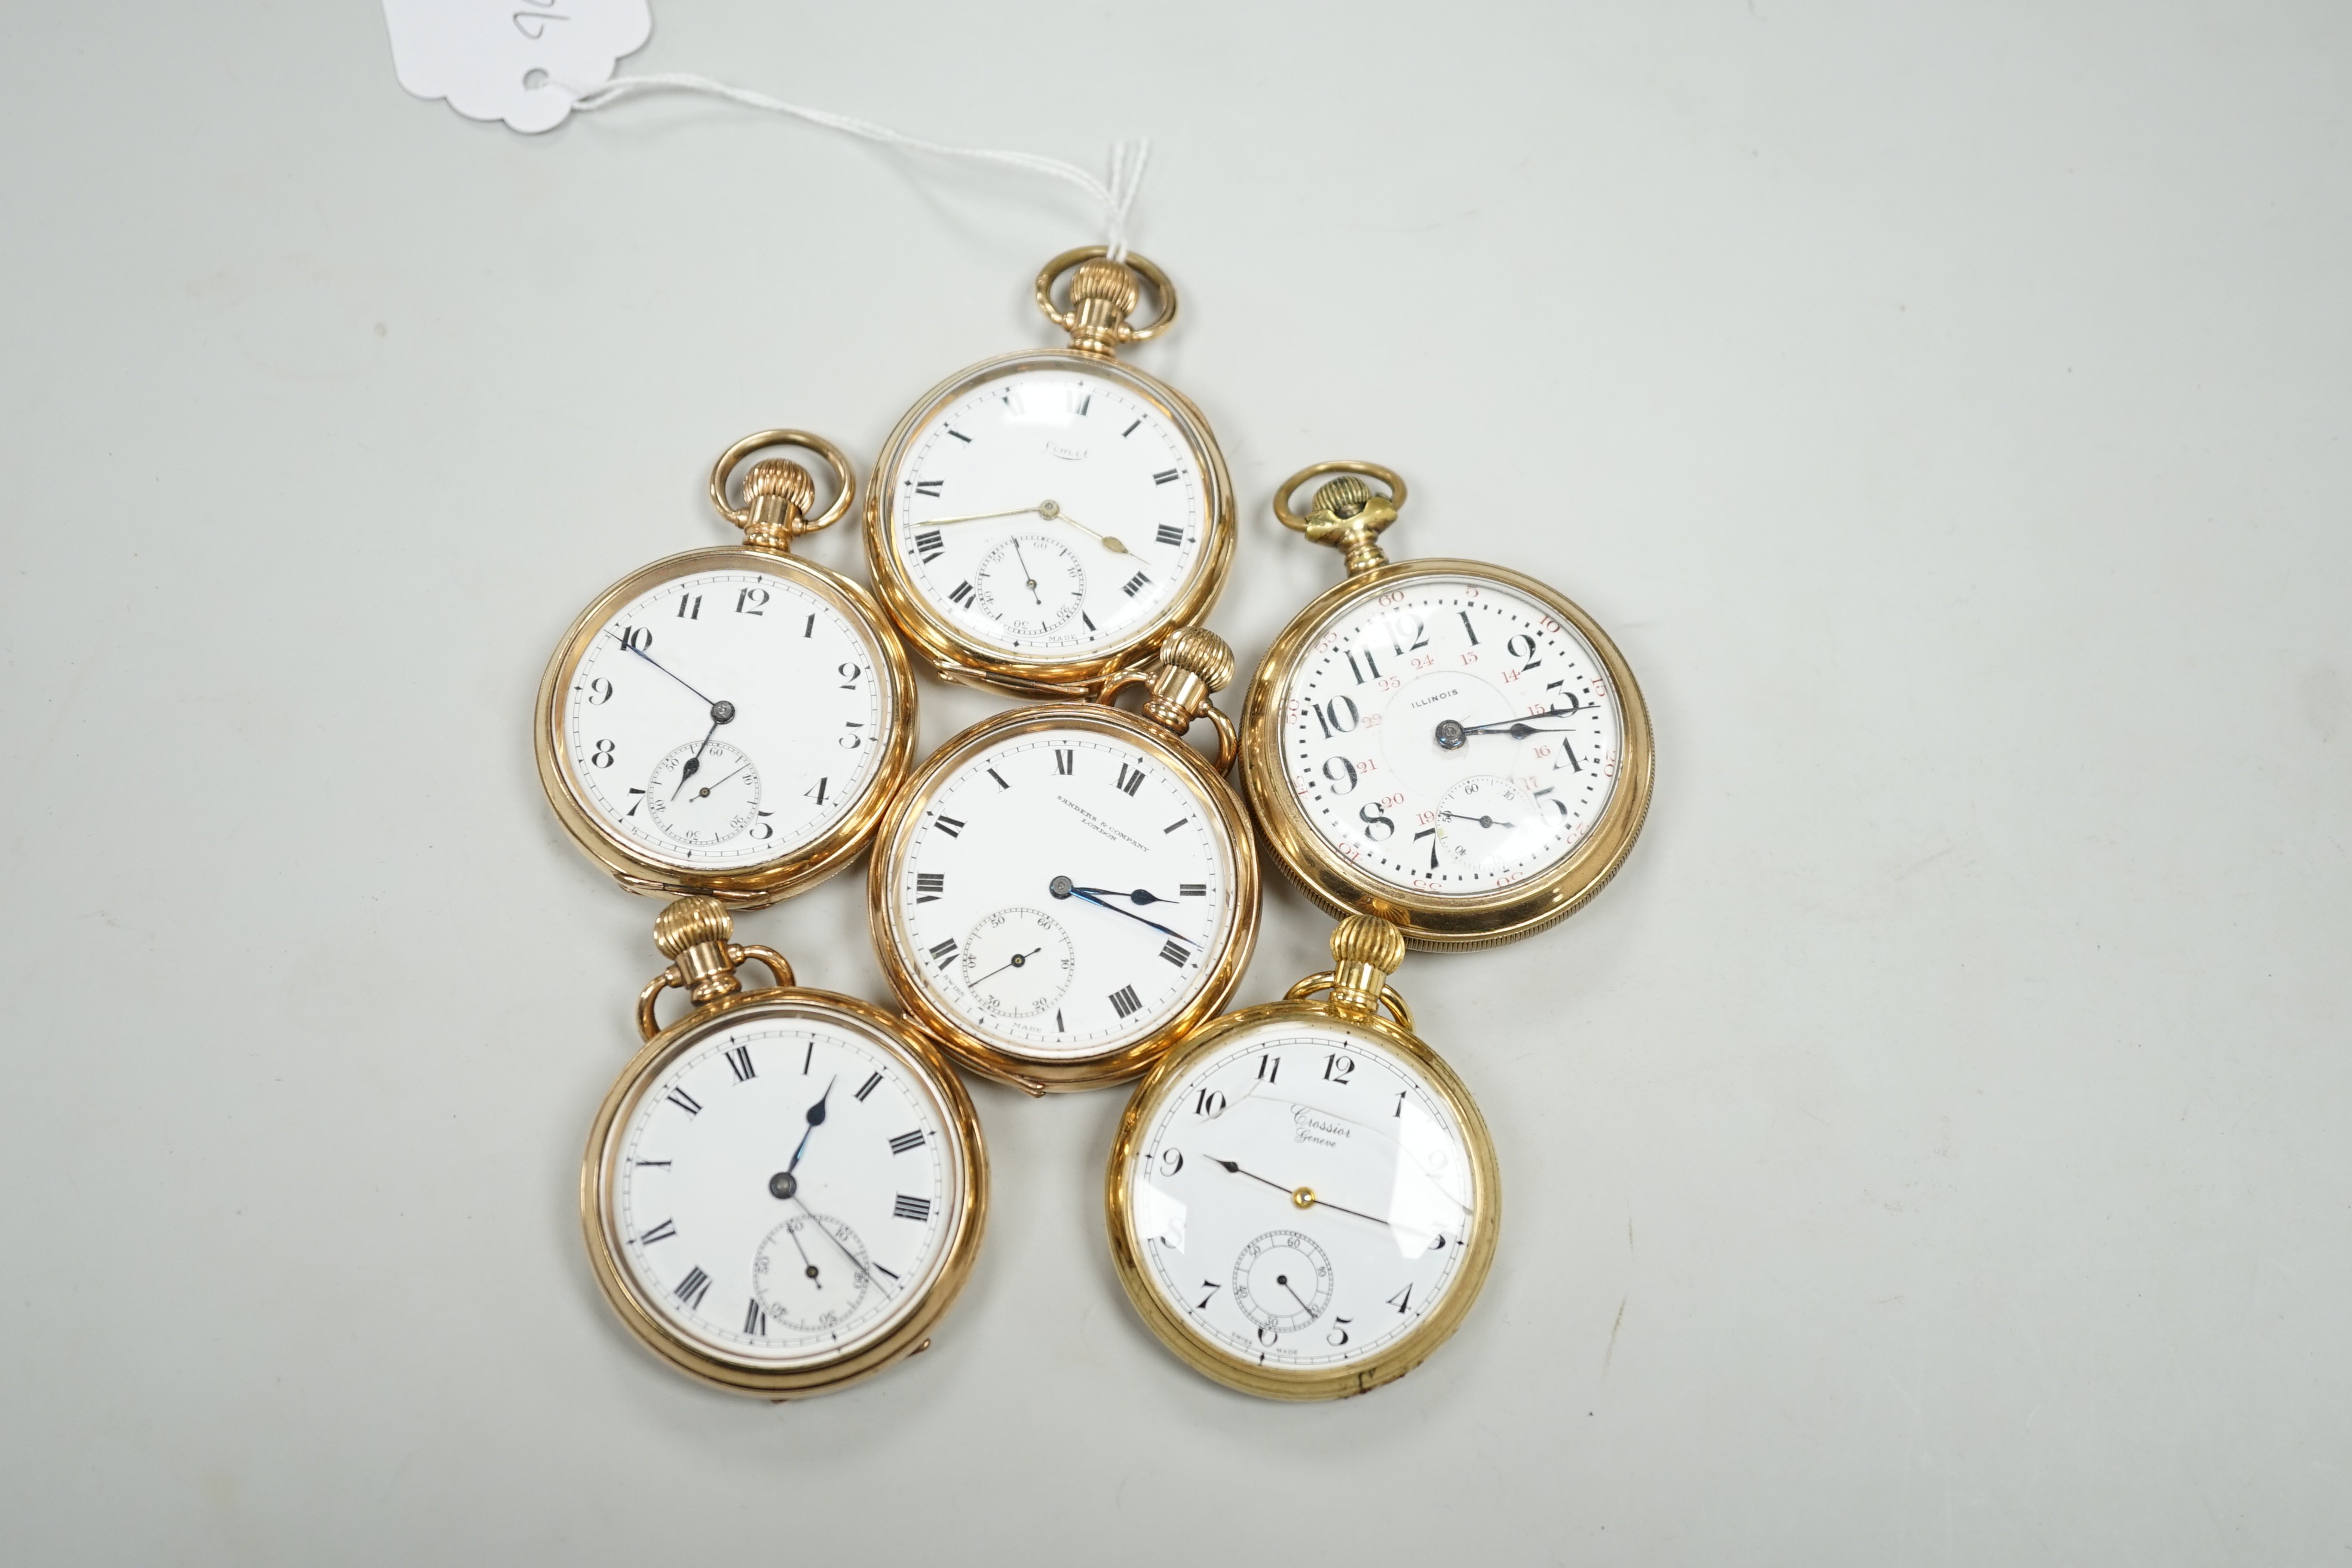 Six assorted gold plated open faces pocket watches, including Limit and Sanders Company. - Image 2 of 6